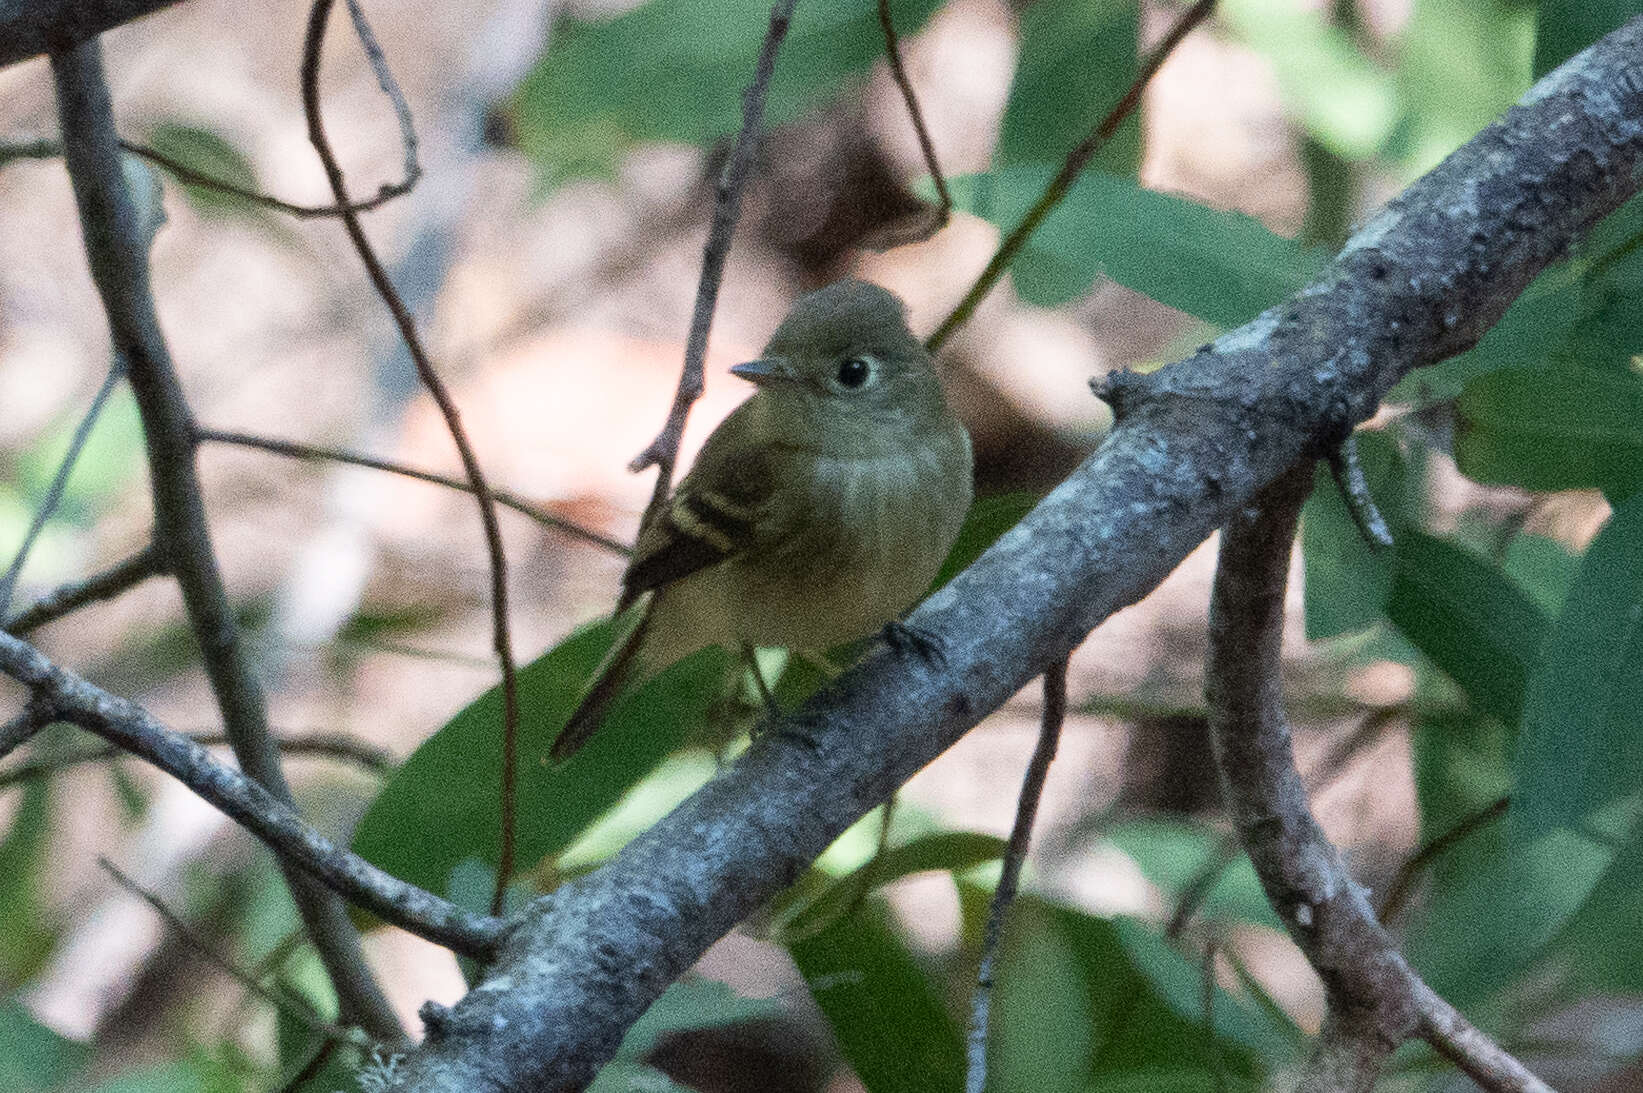 Image of Pacific-slope Flycatcher